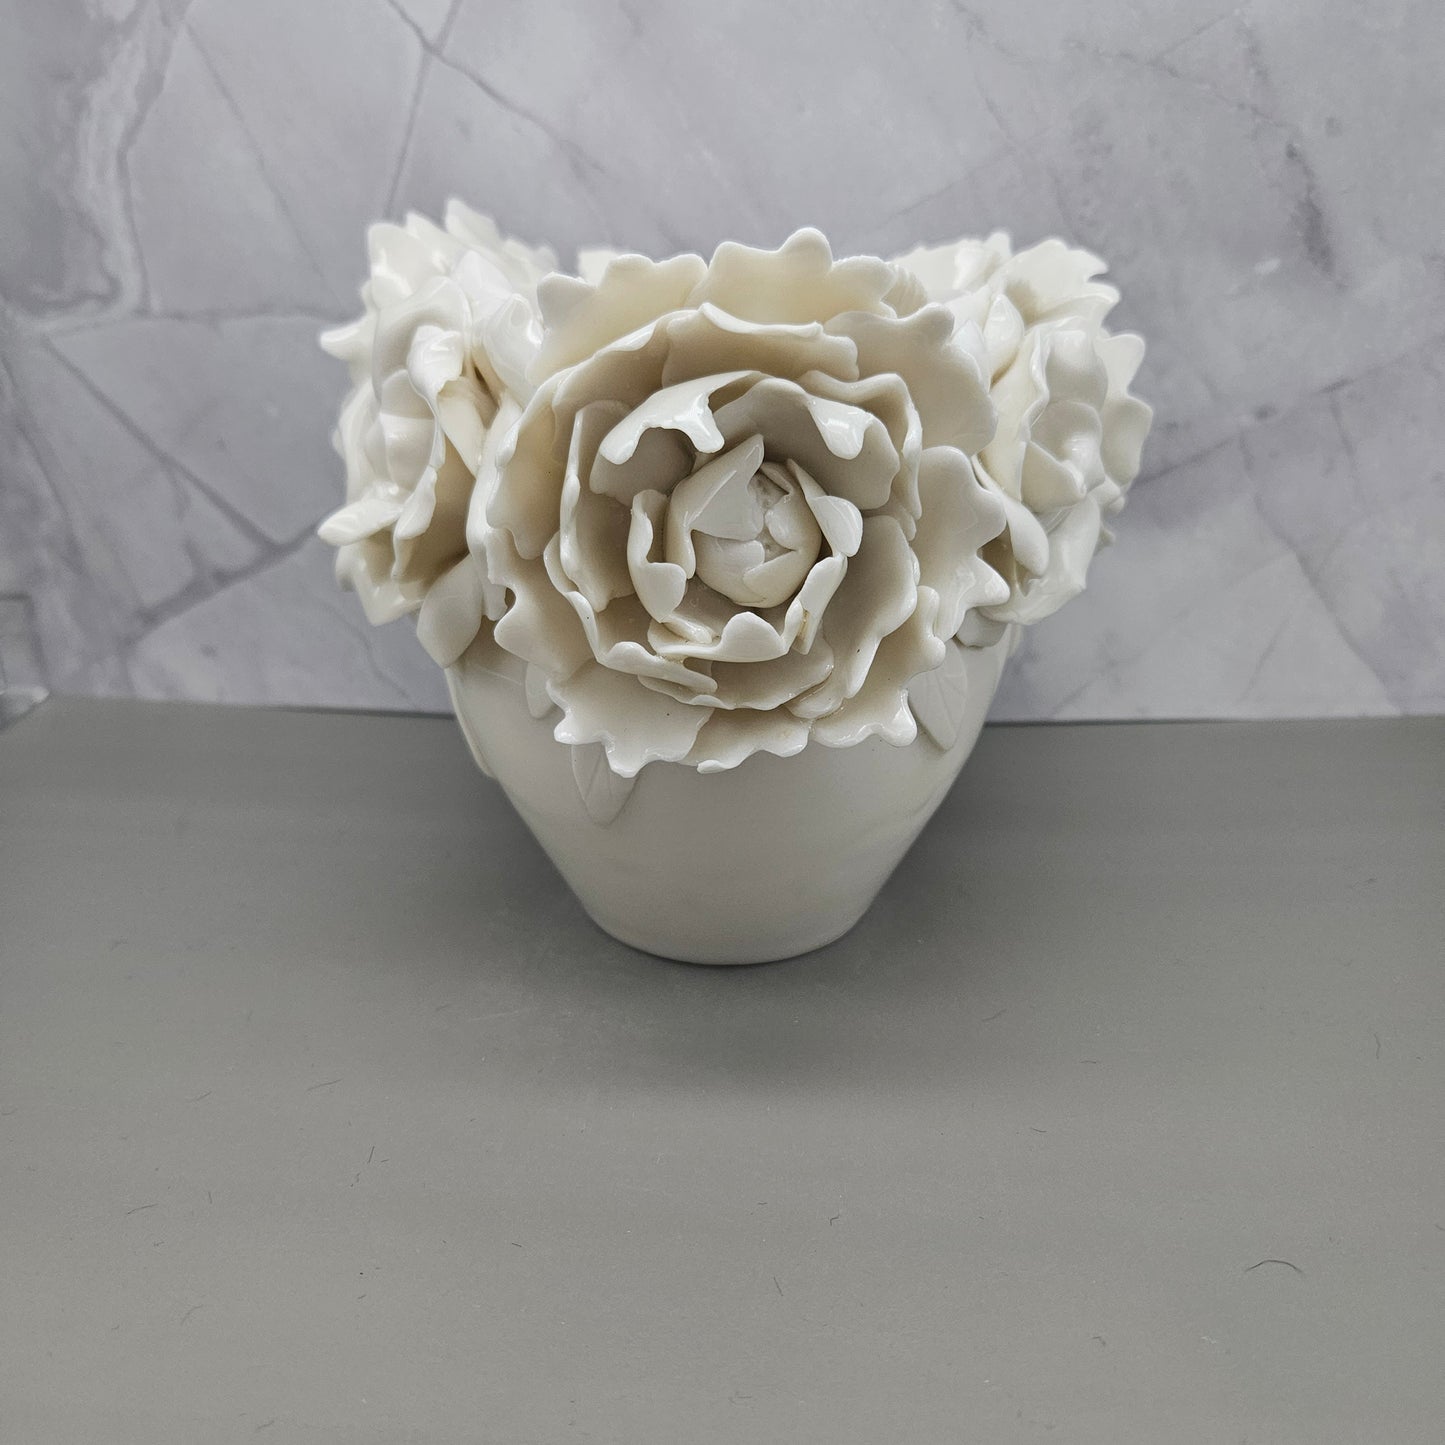 White frost vase with handmade flowers, standing 5 inches tall